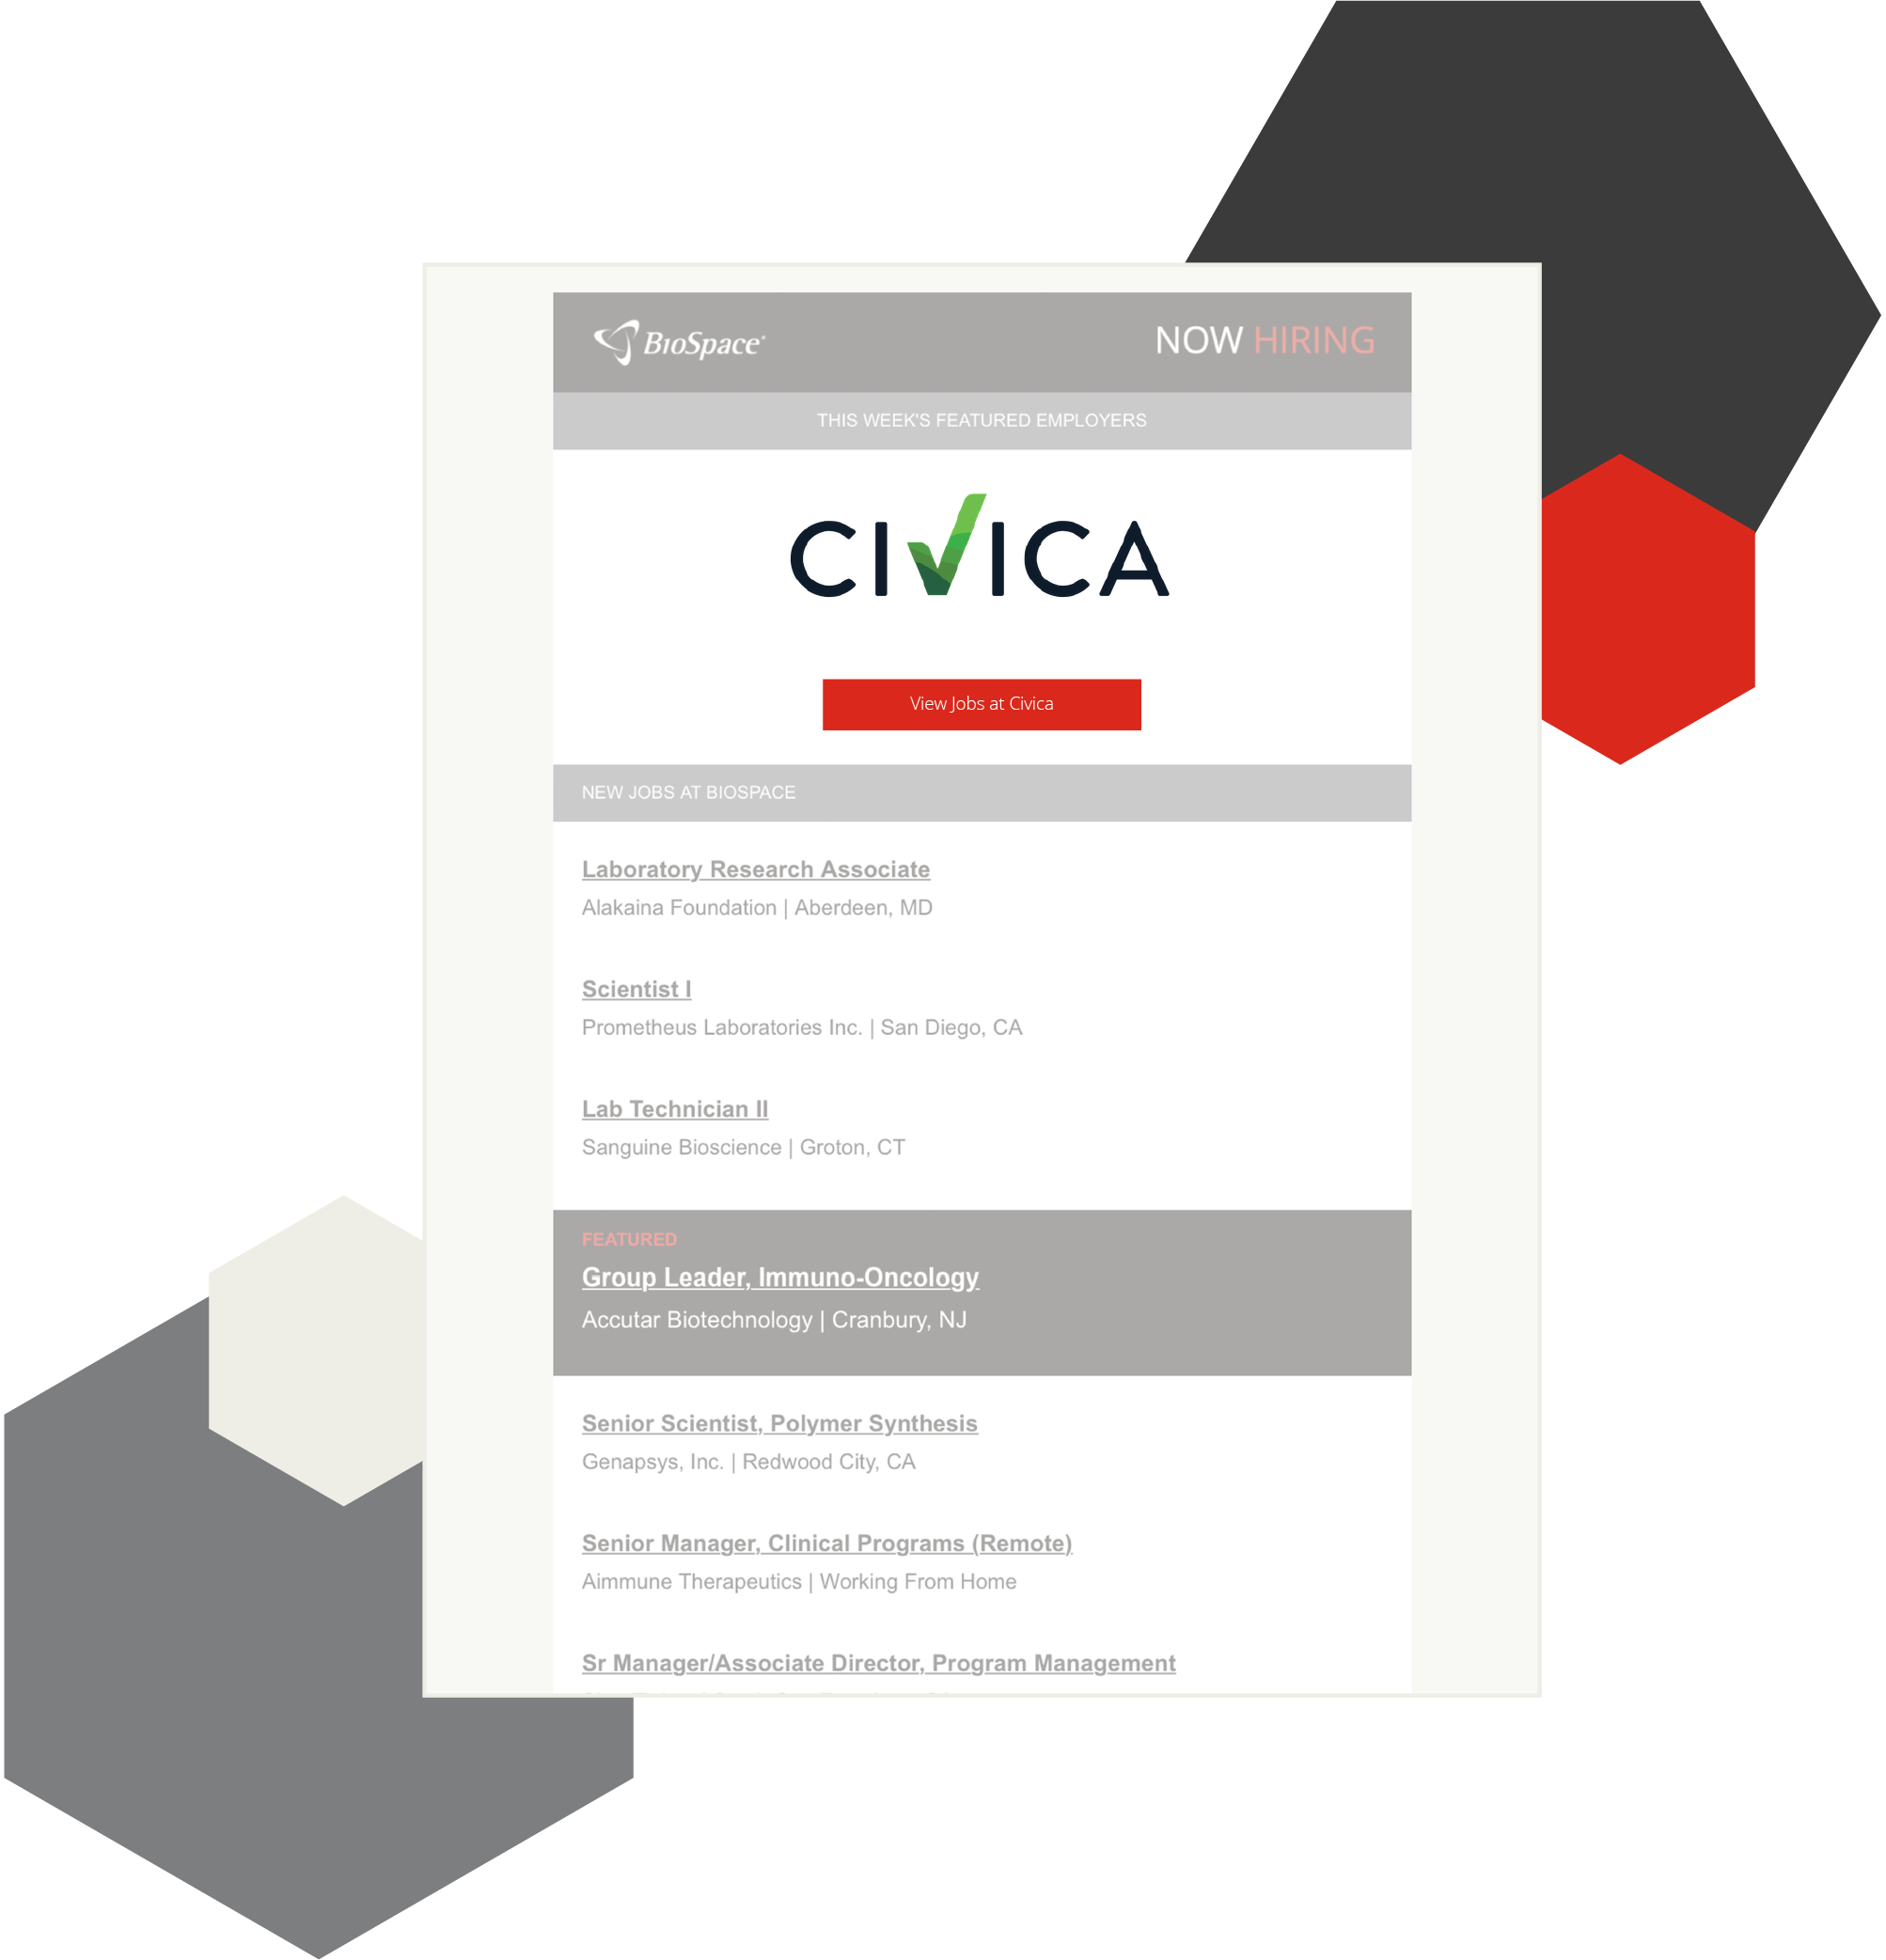 202205 - Product Clusters - Now Hiring Feature - Civica